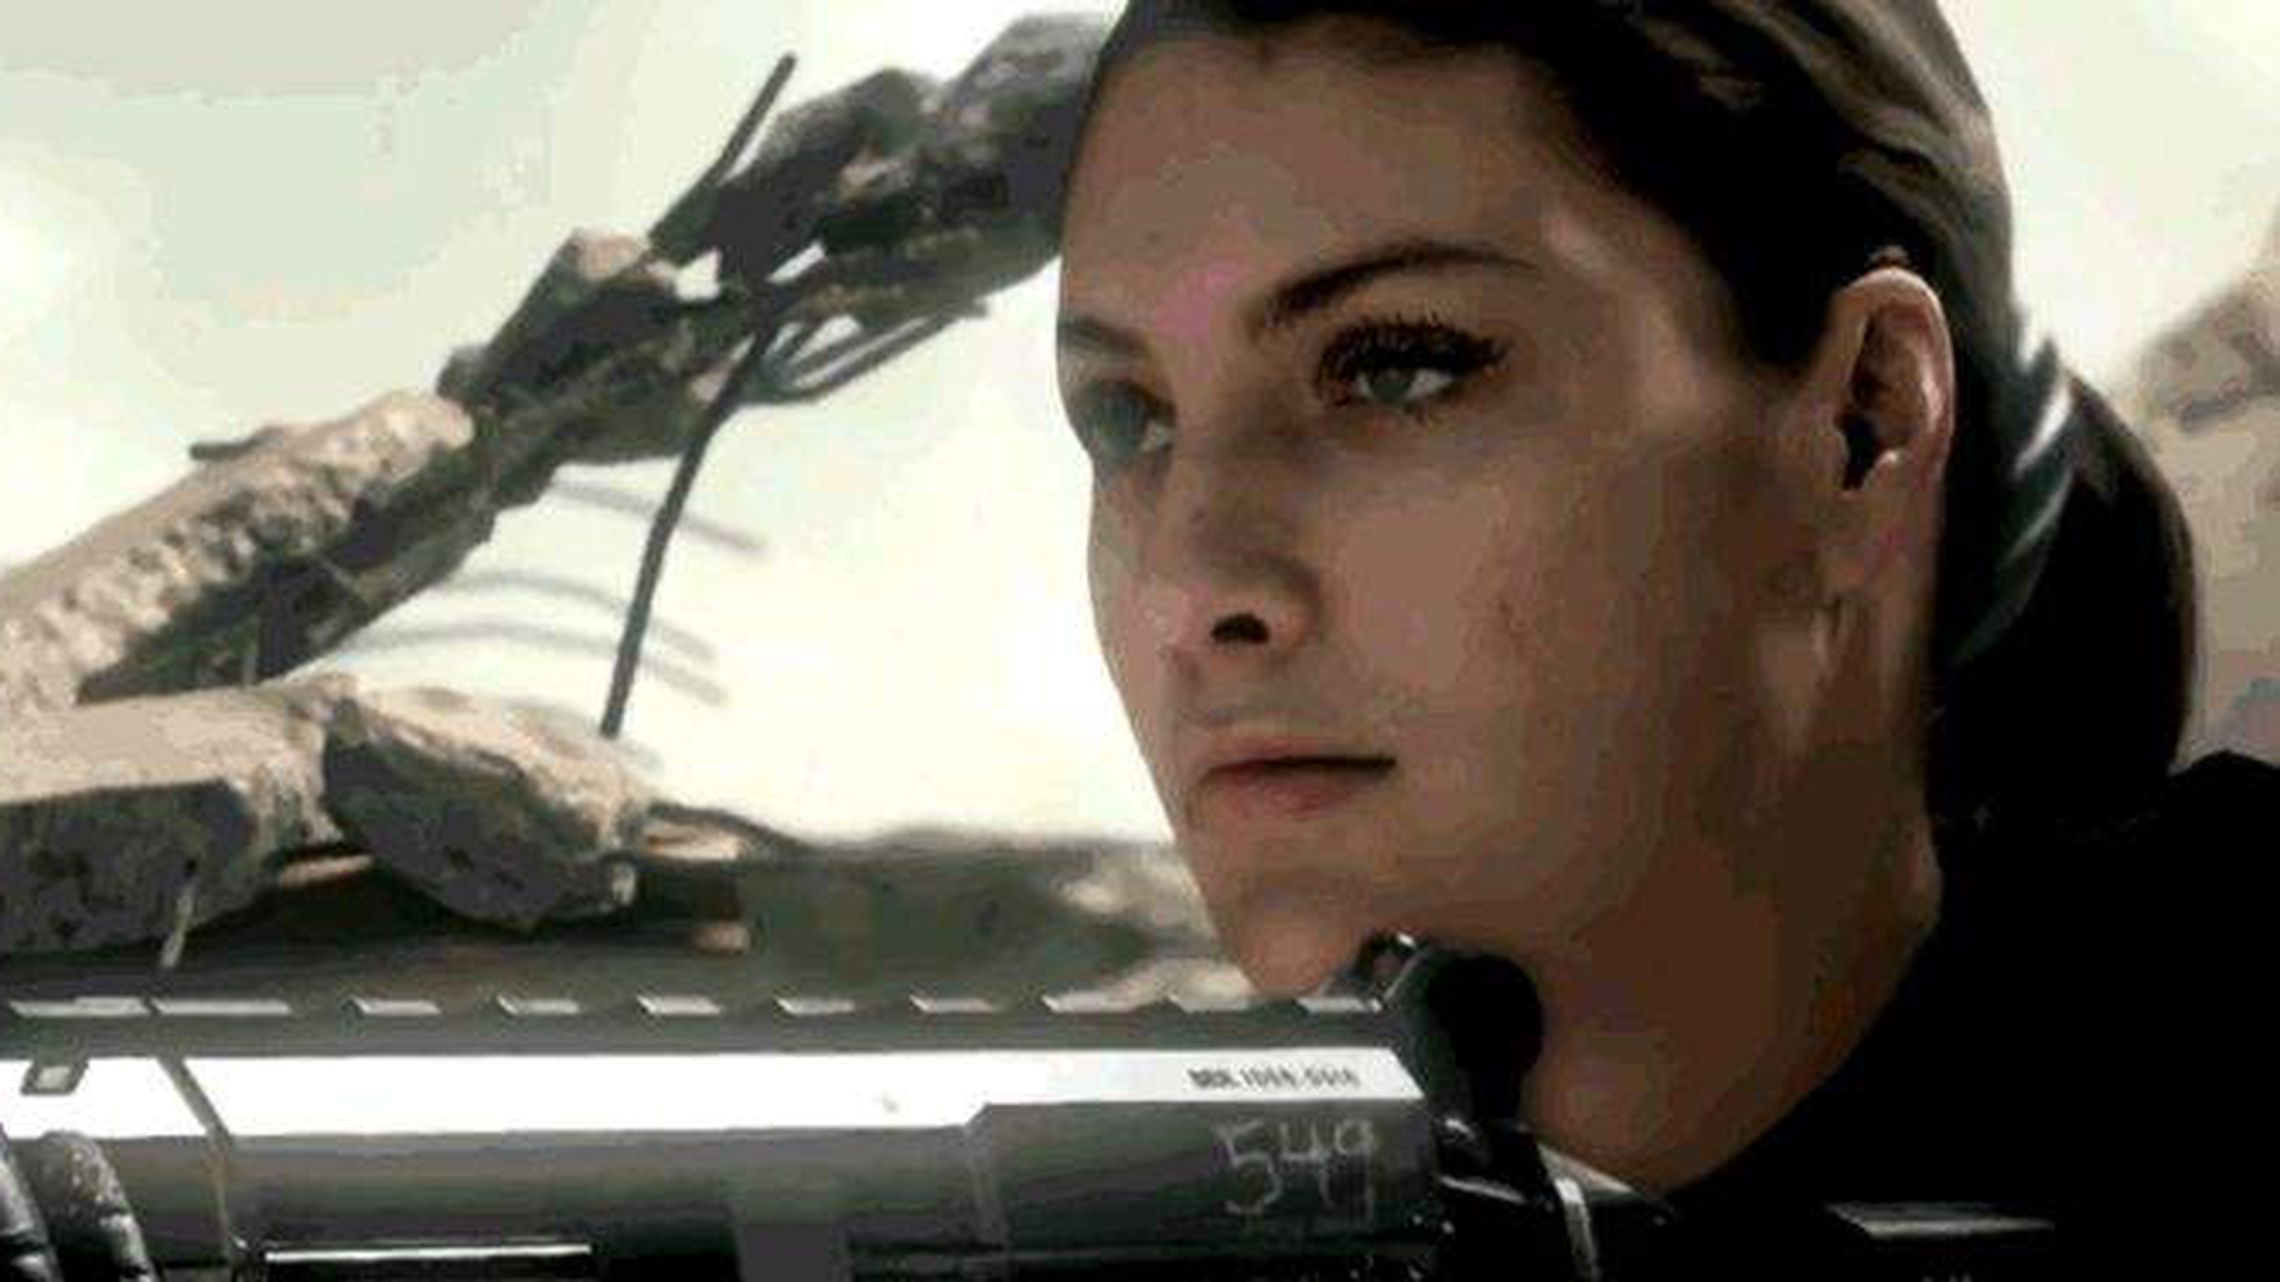 Call of Duty: Ghosts' female character not quite a blow for equality